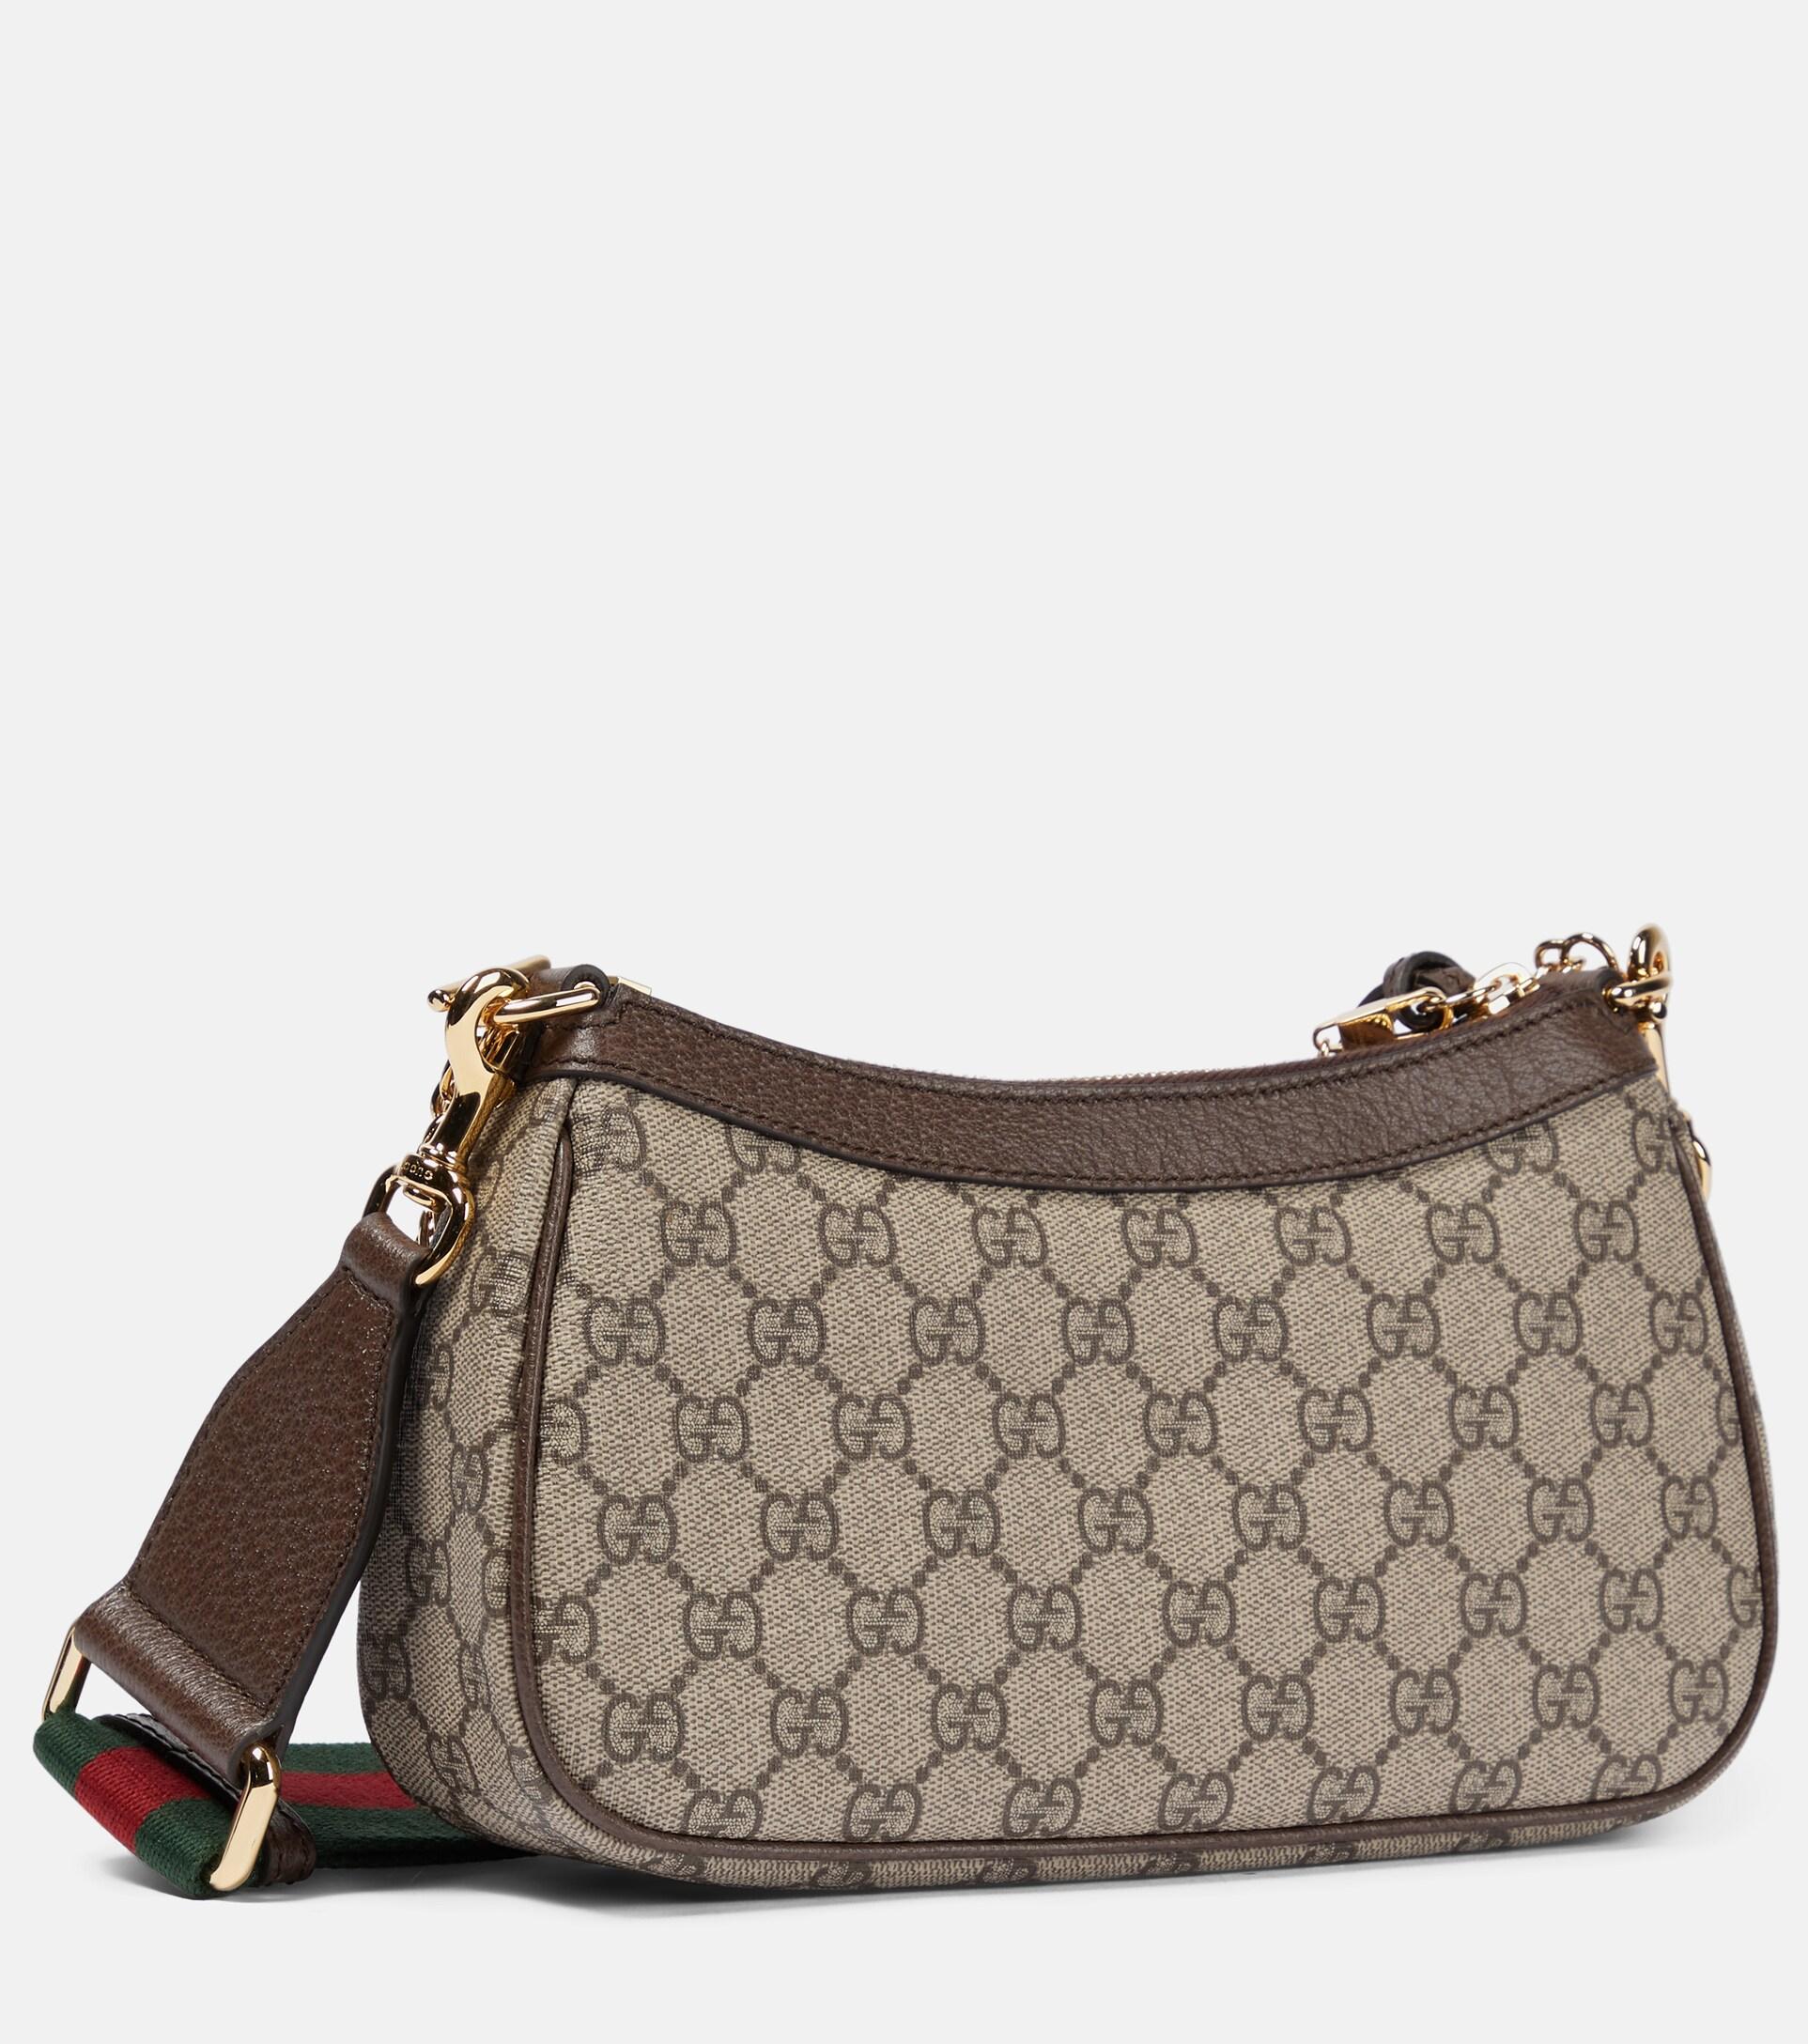 Gucci Beige Small Ophidia GG Shoulder Bag for Women